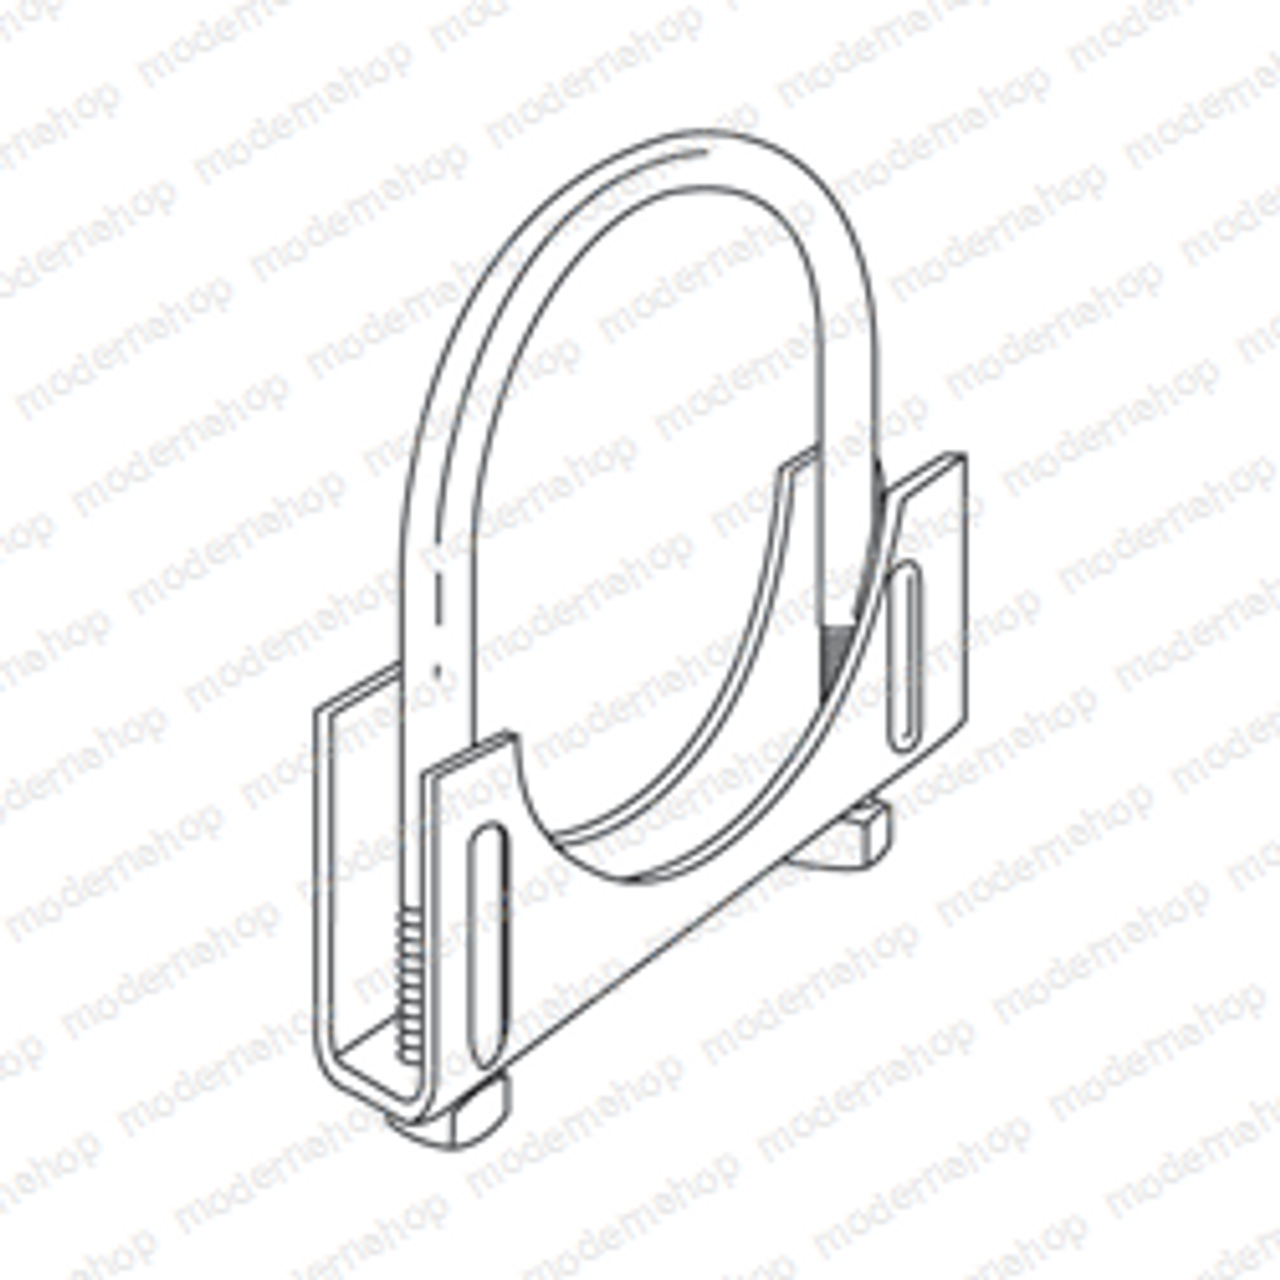 222A2-30201: TCM Forklift CLAMP - EXHAUST 1 7/8 INCH